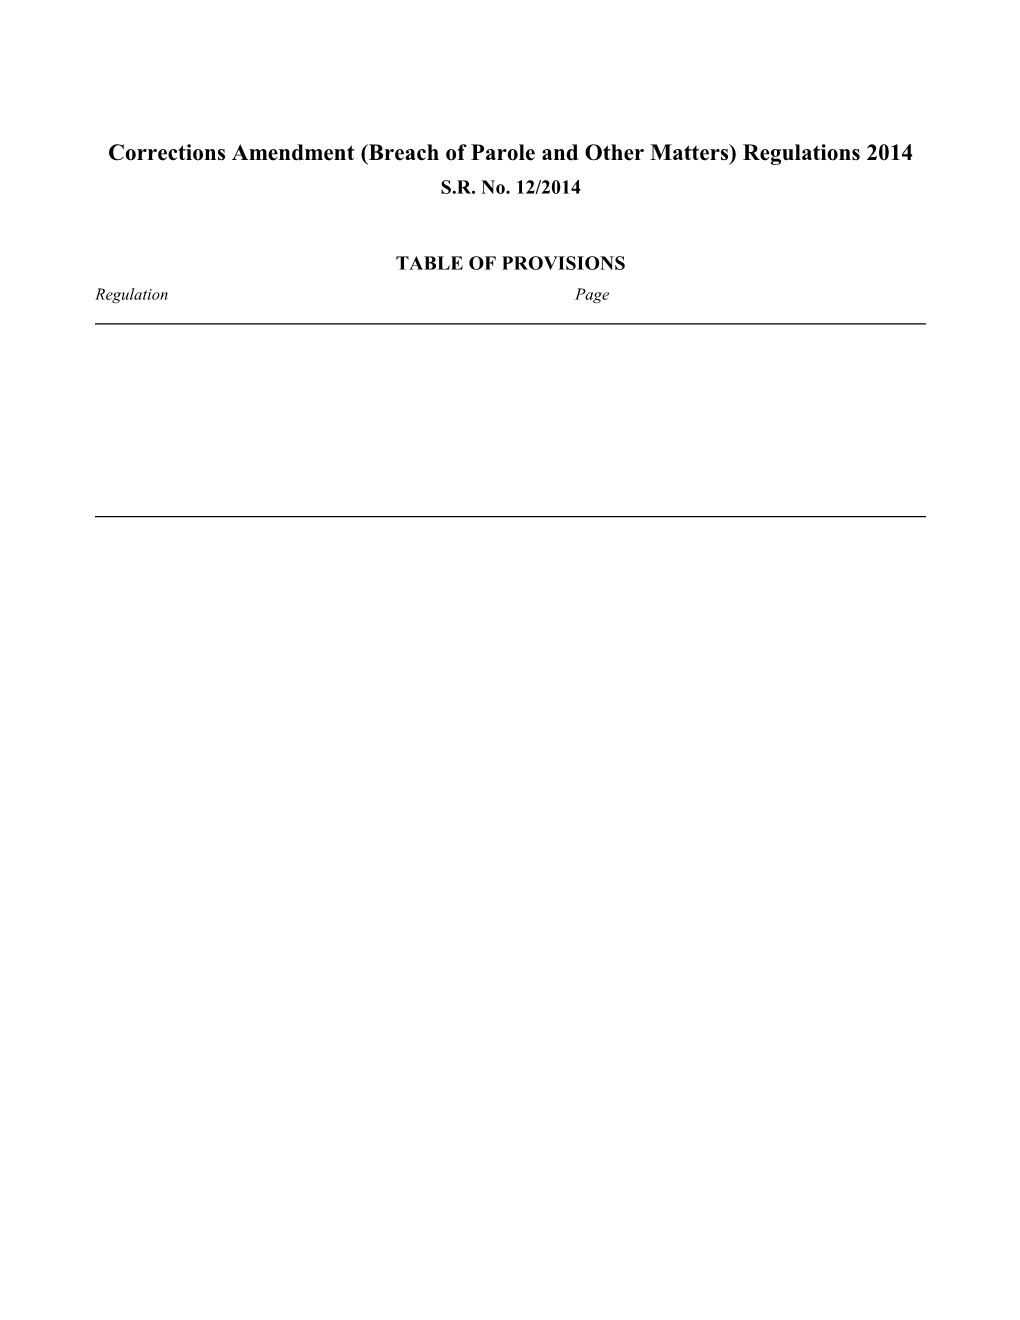 Corrections Amendment (Breach of Parole and Other Matters) Regulations 2014